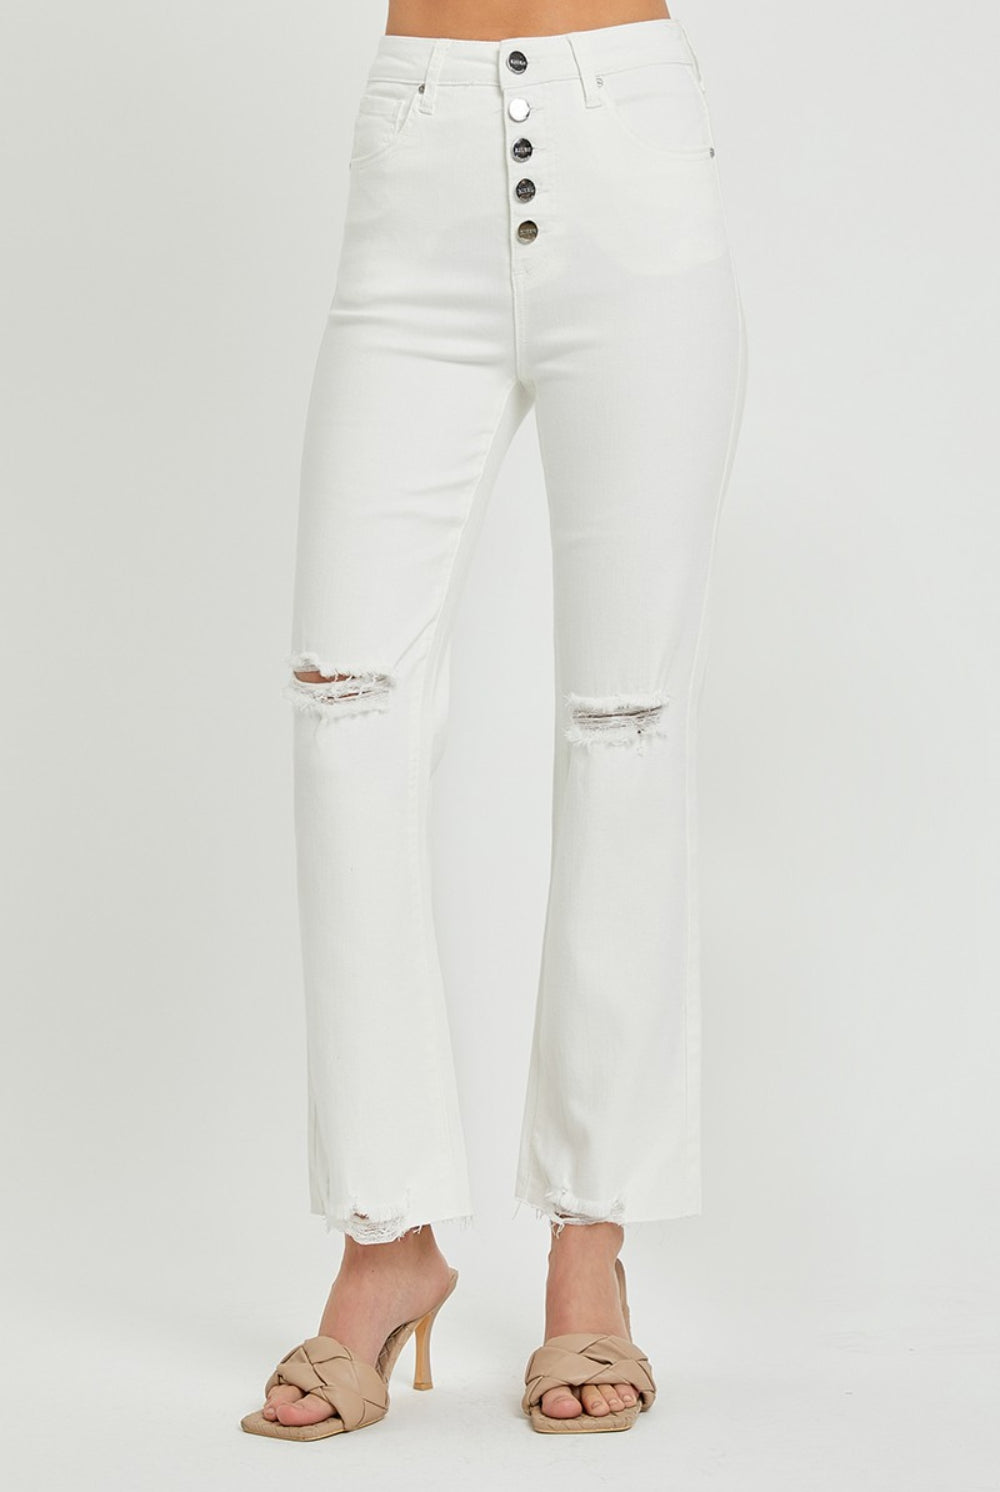 Model wearing GemThreads Boutique Distressed High-Rise Bootcut Jeans in white.